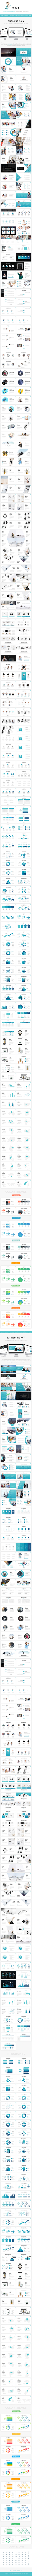 Bundle 2 in 1 Effective Business Powerpoint Template